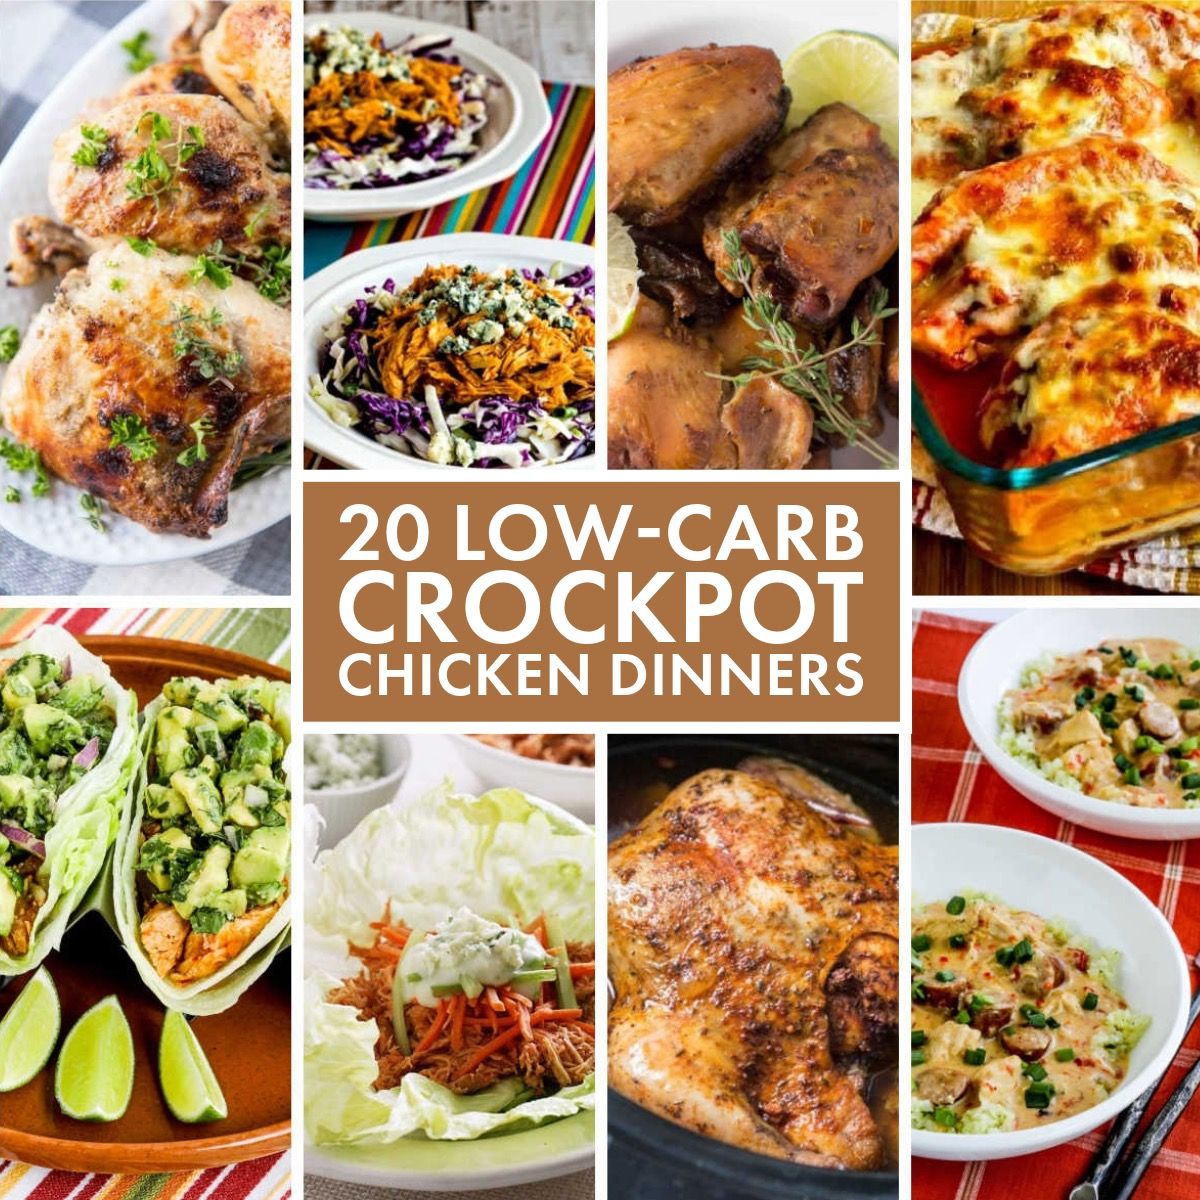 20 Low-Carb CrockPot Chicken Dinners text overlay collage of featured recipes.